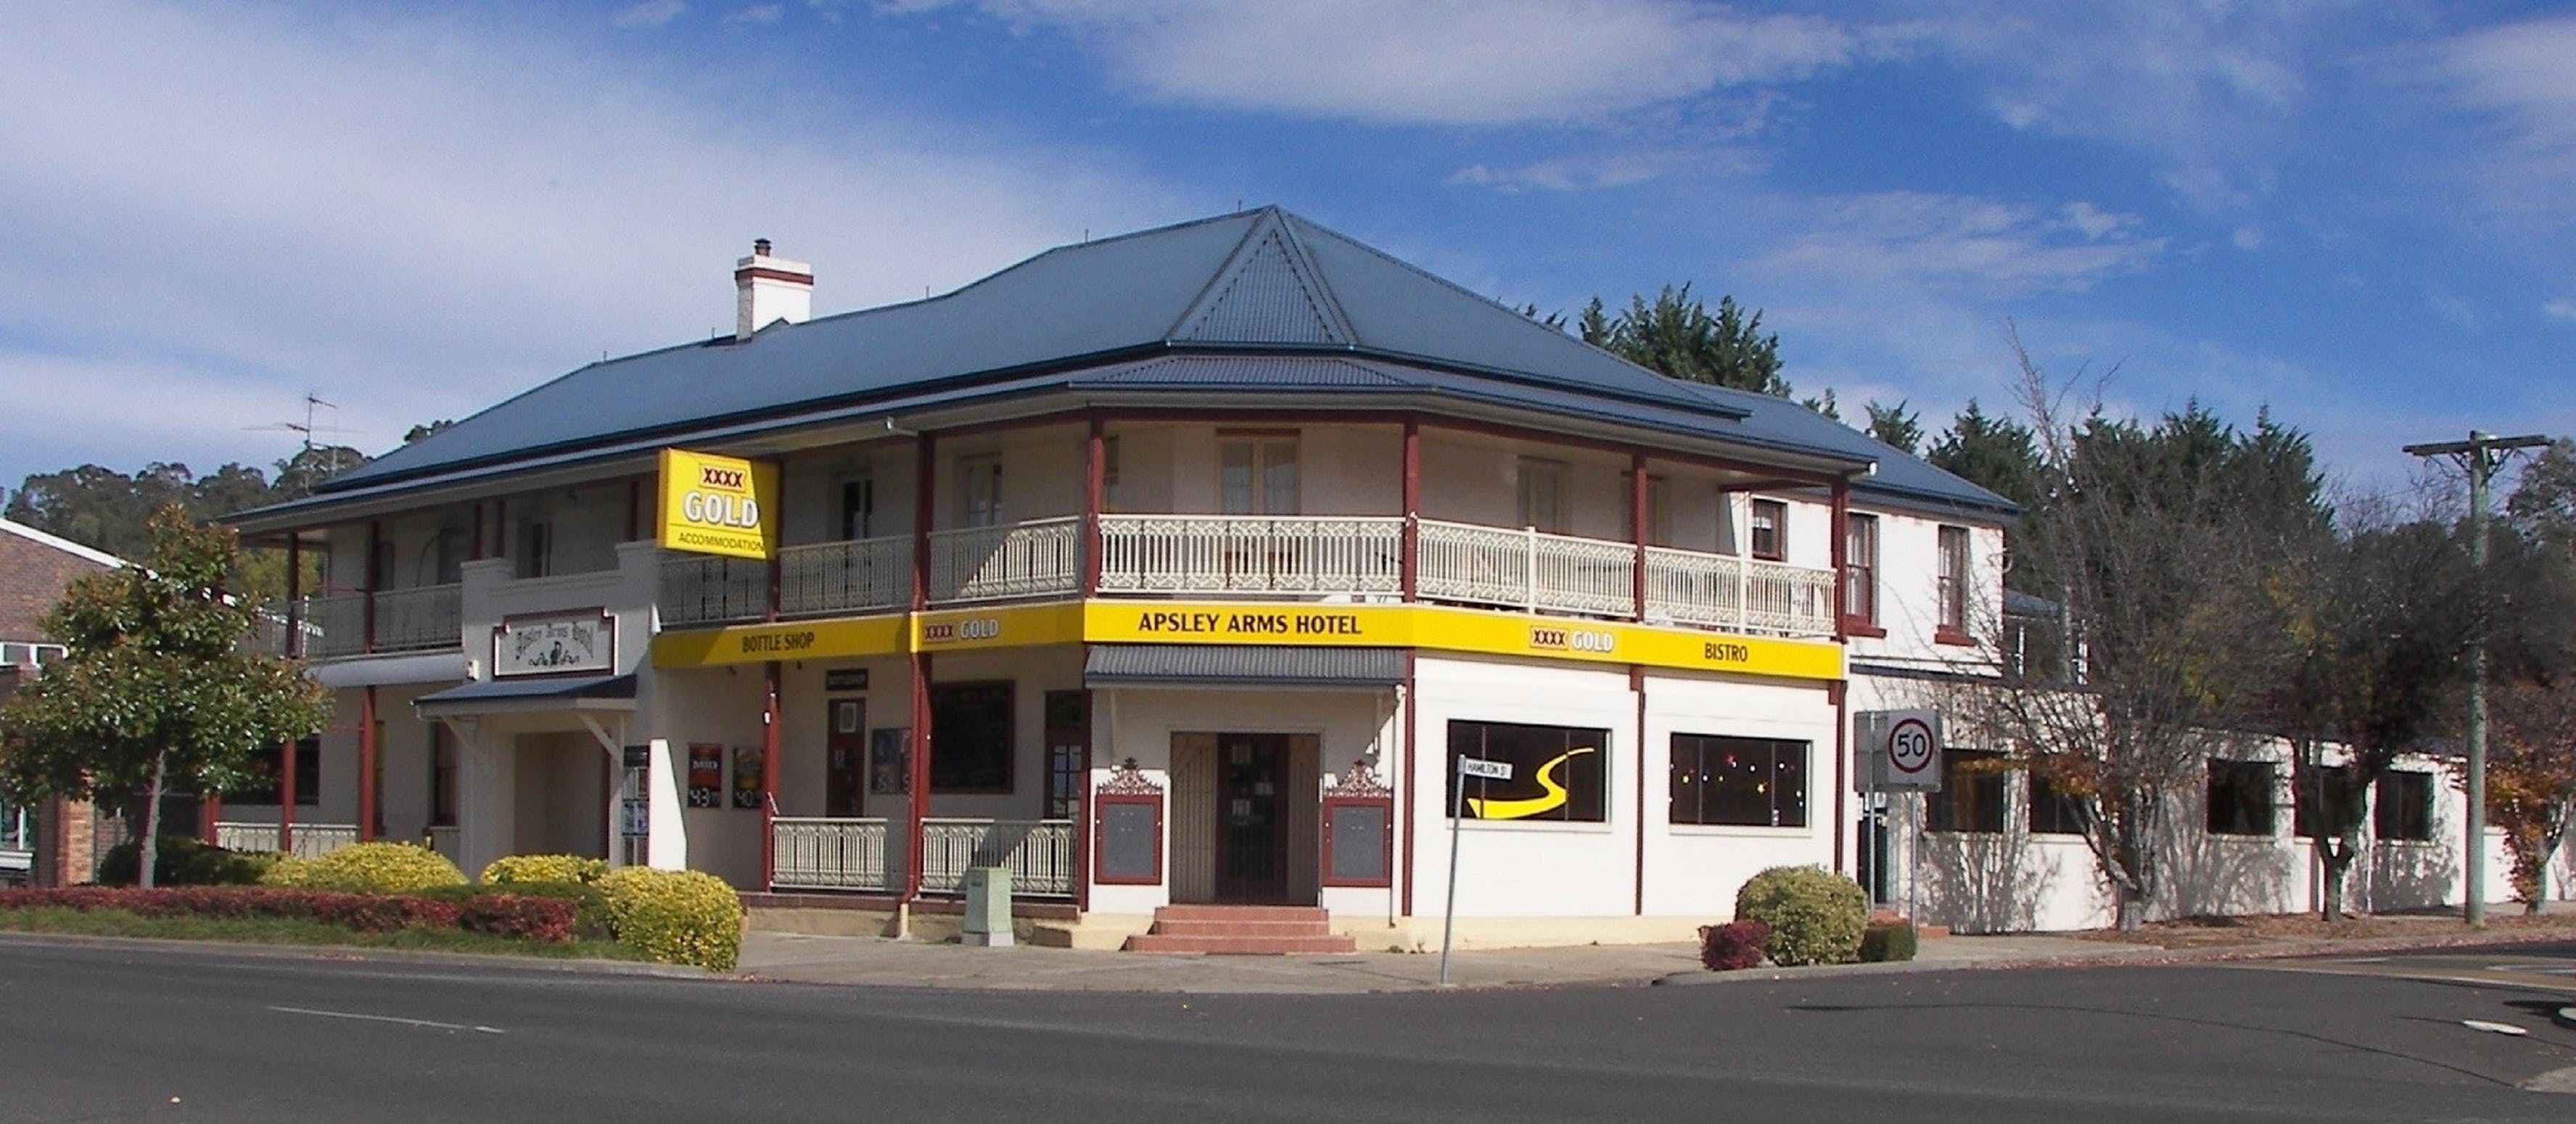 Apsley Arms Hotel - Dalby Accommodation